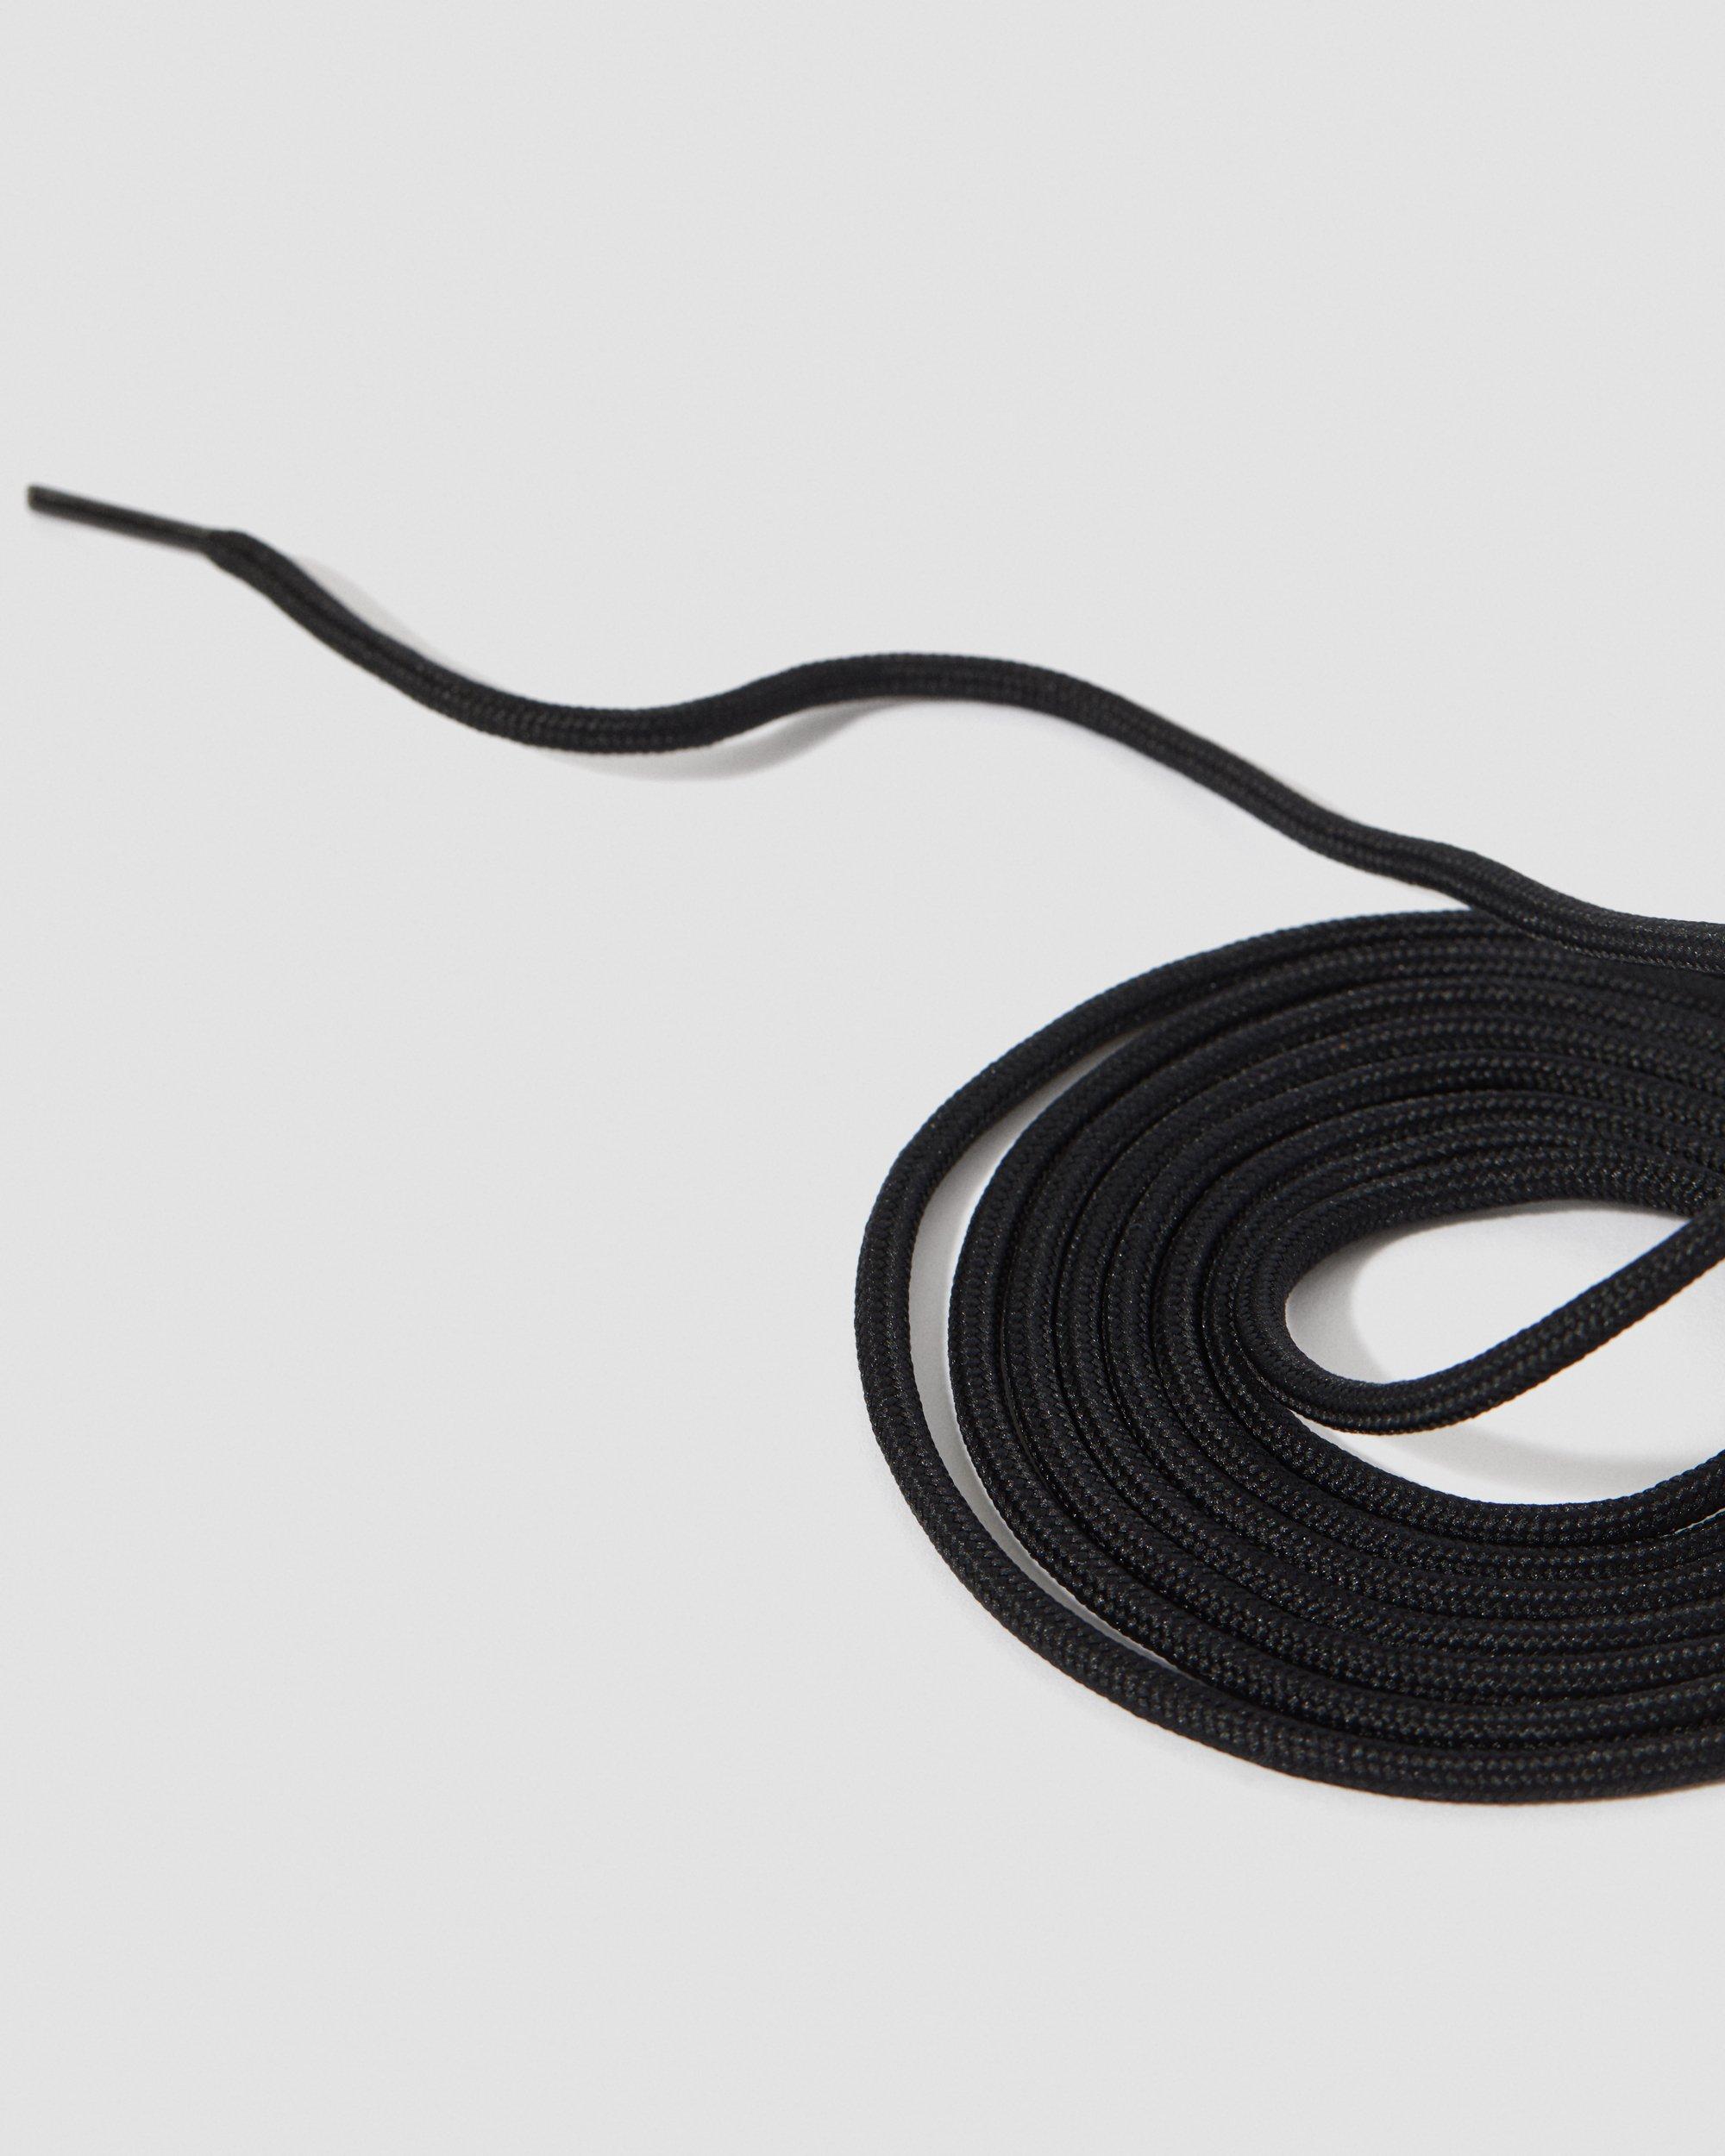 210cm Round Shoe Laces (12-14 Eye) in Black